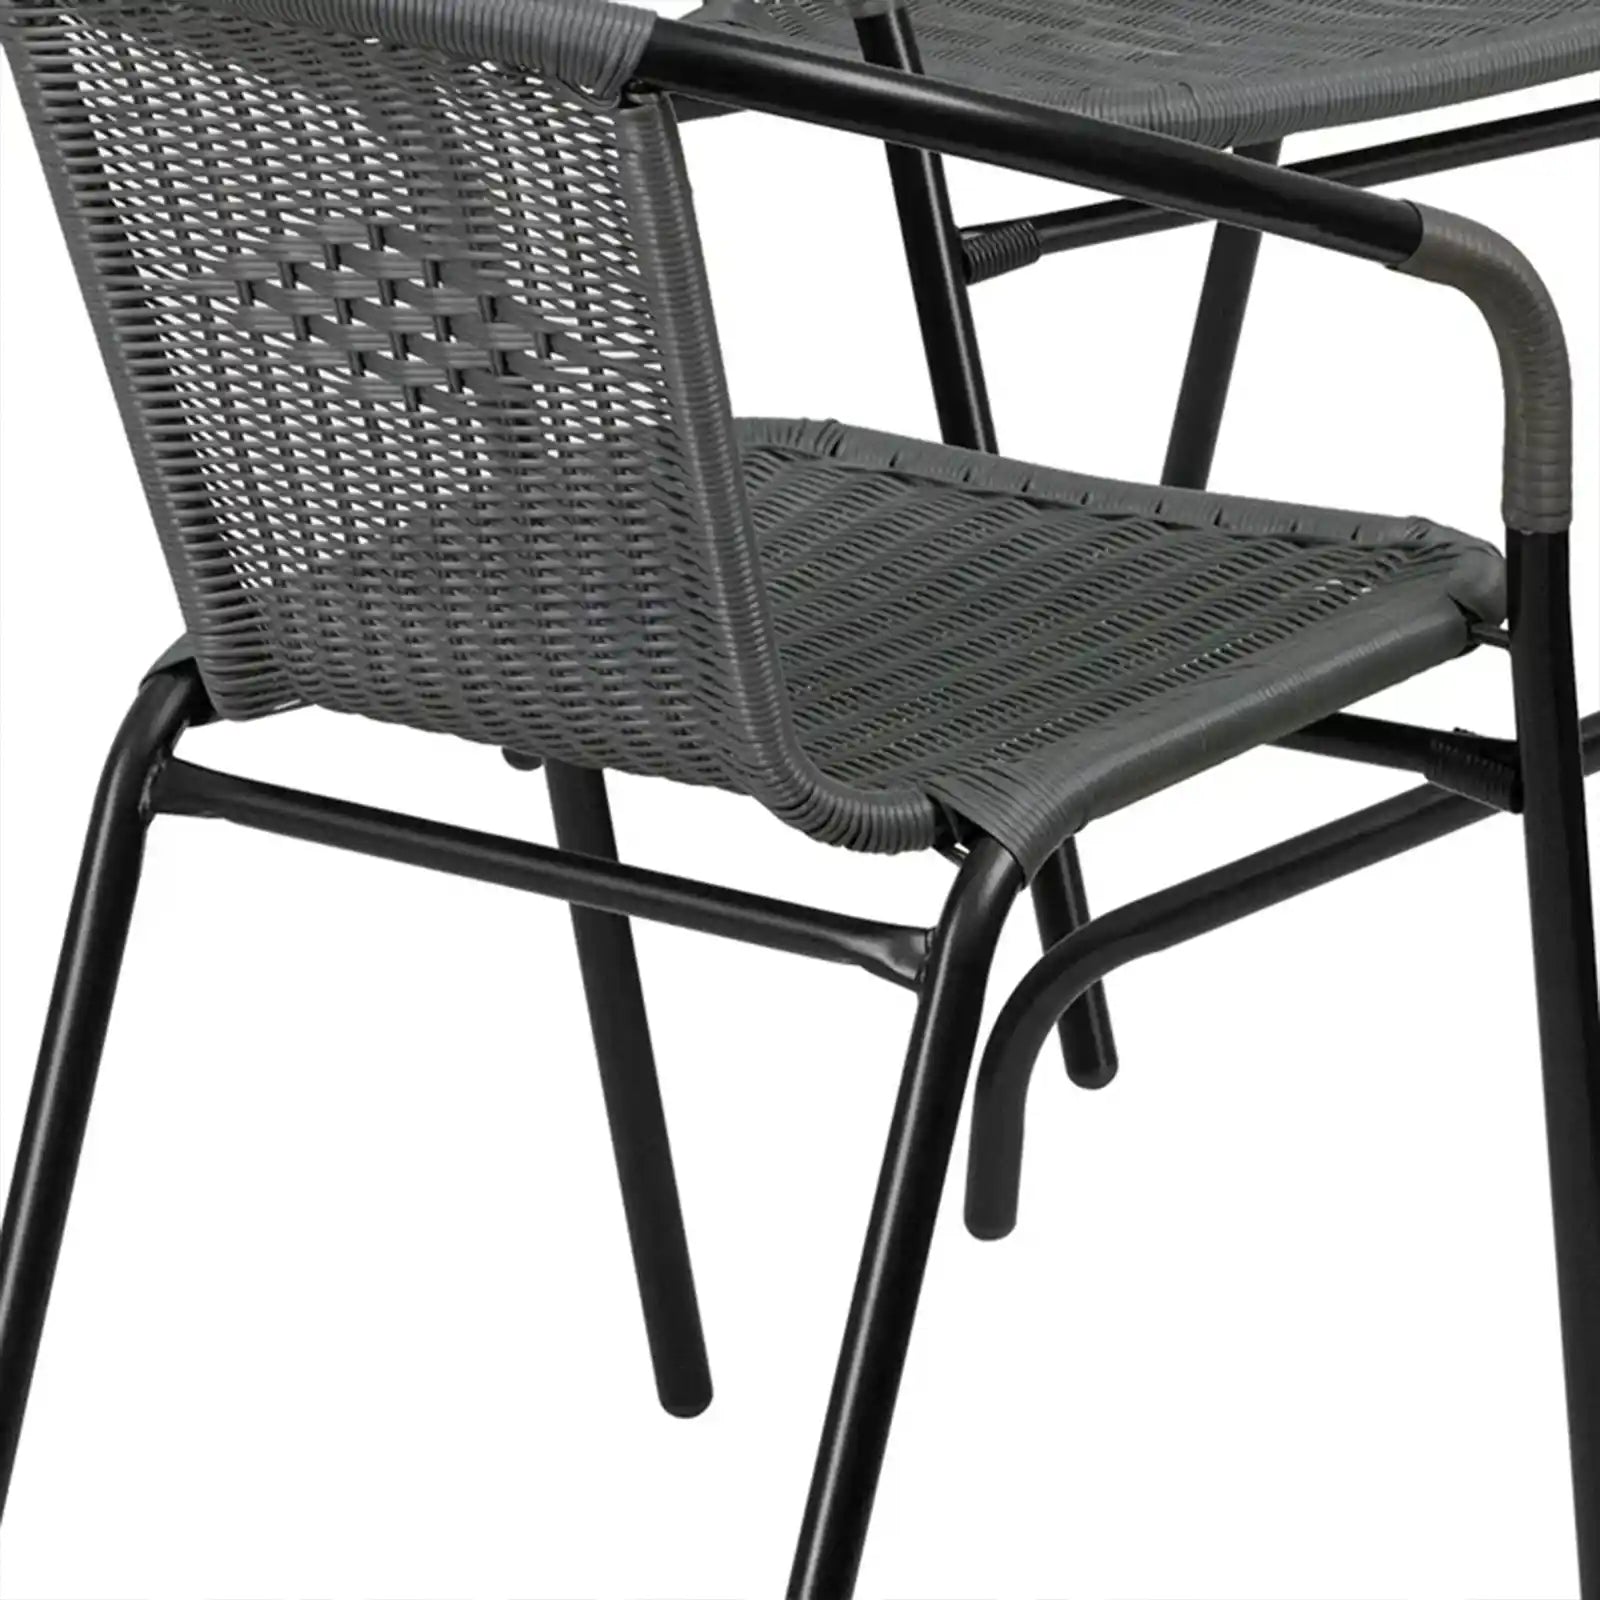 Square Glass Metal Table with Rattan Edging and 4 Rattan Stack Chairs